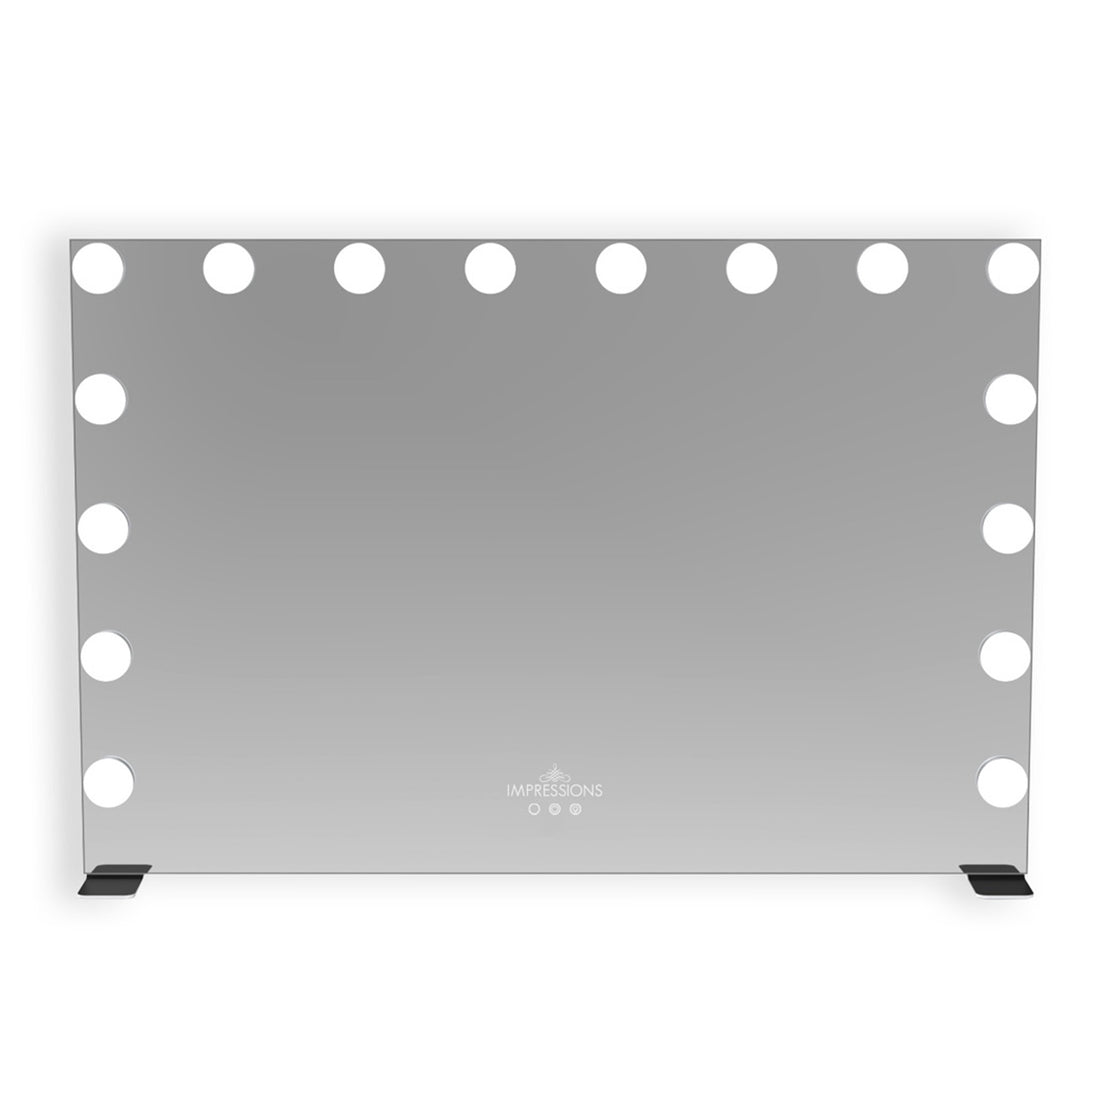 Glamour Tri-Tone Wide LED Makeup Mirror